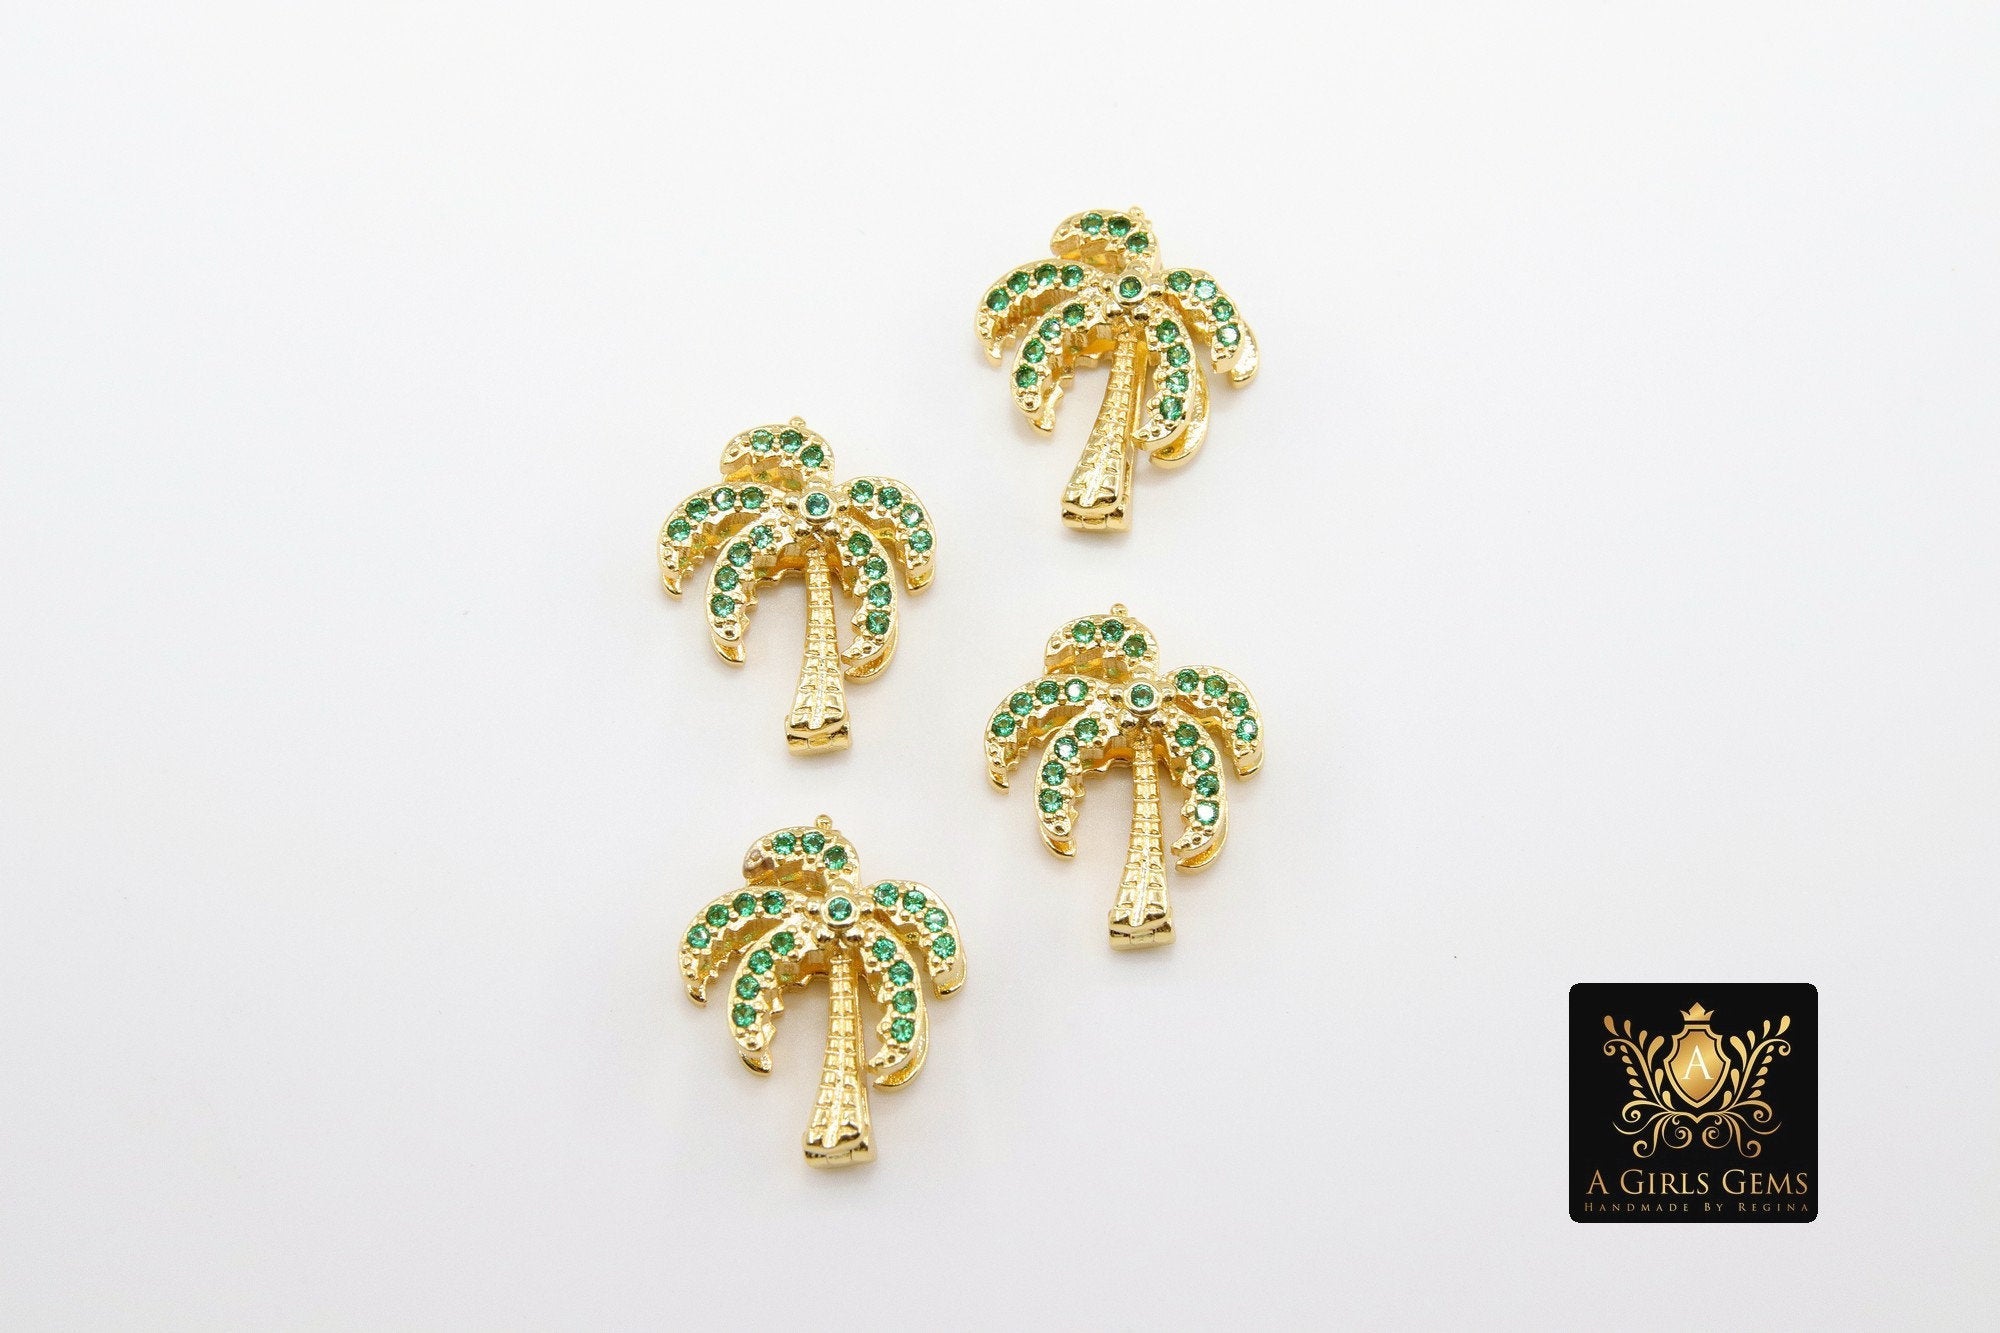 CZ Micro Pave Palm Coconut Tree Slider Charms, Gold Tropical Charms, Beach Ocean Charm Bracelet, 10 mm Flat Leather Color Straps Jewelry - A Girls Gems